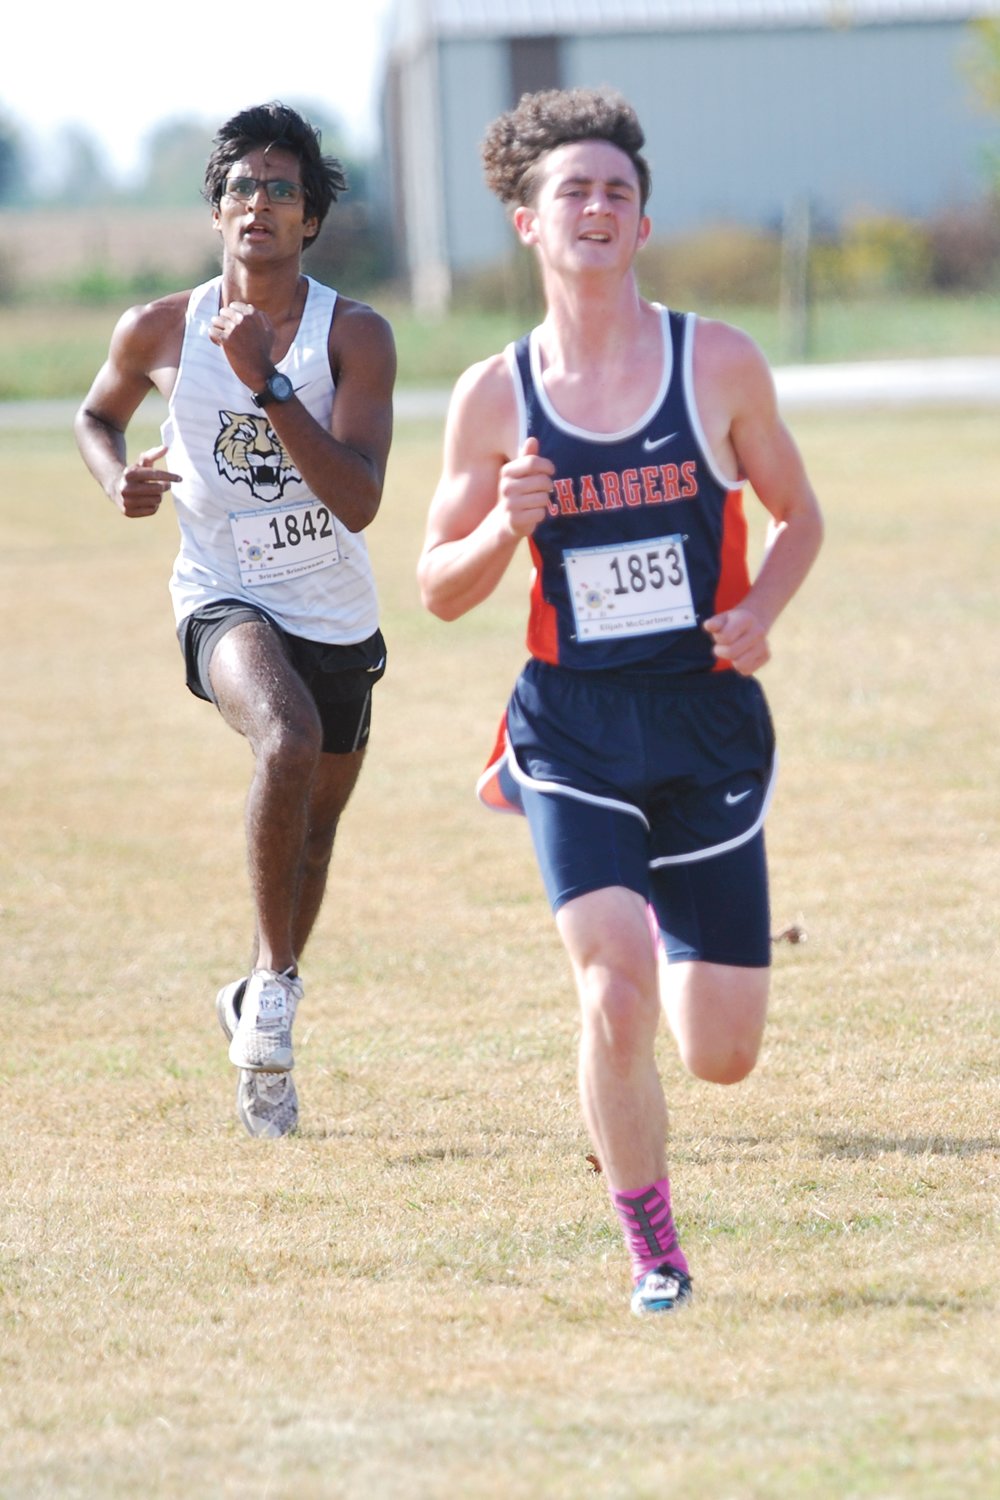 North Montgomery's Elijah McCartney cruised to a first-team all-conference selection this fall with a 9th place finish in a time of 17:54.